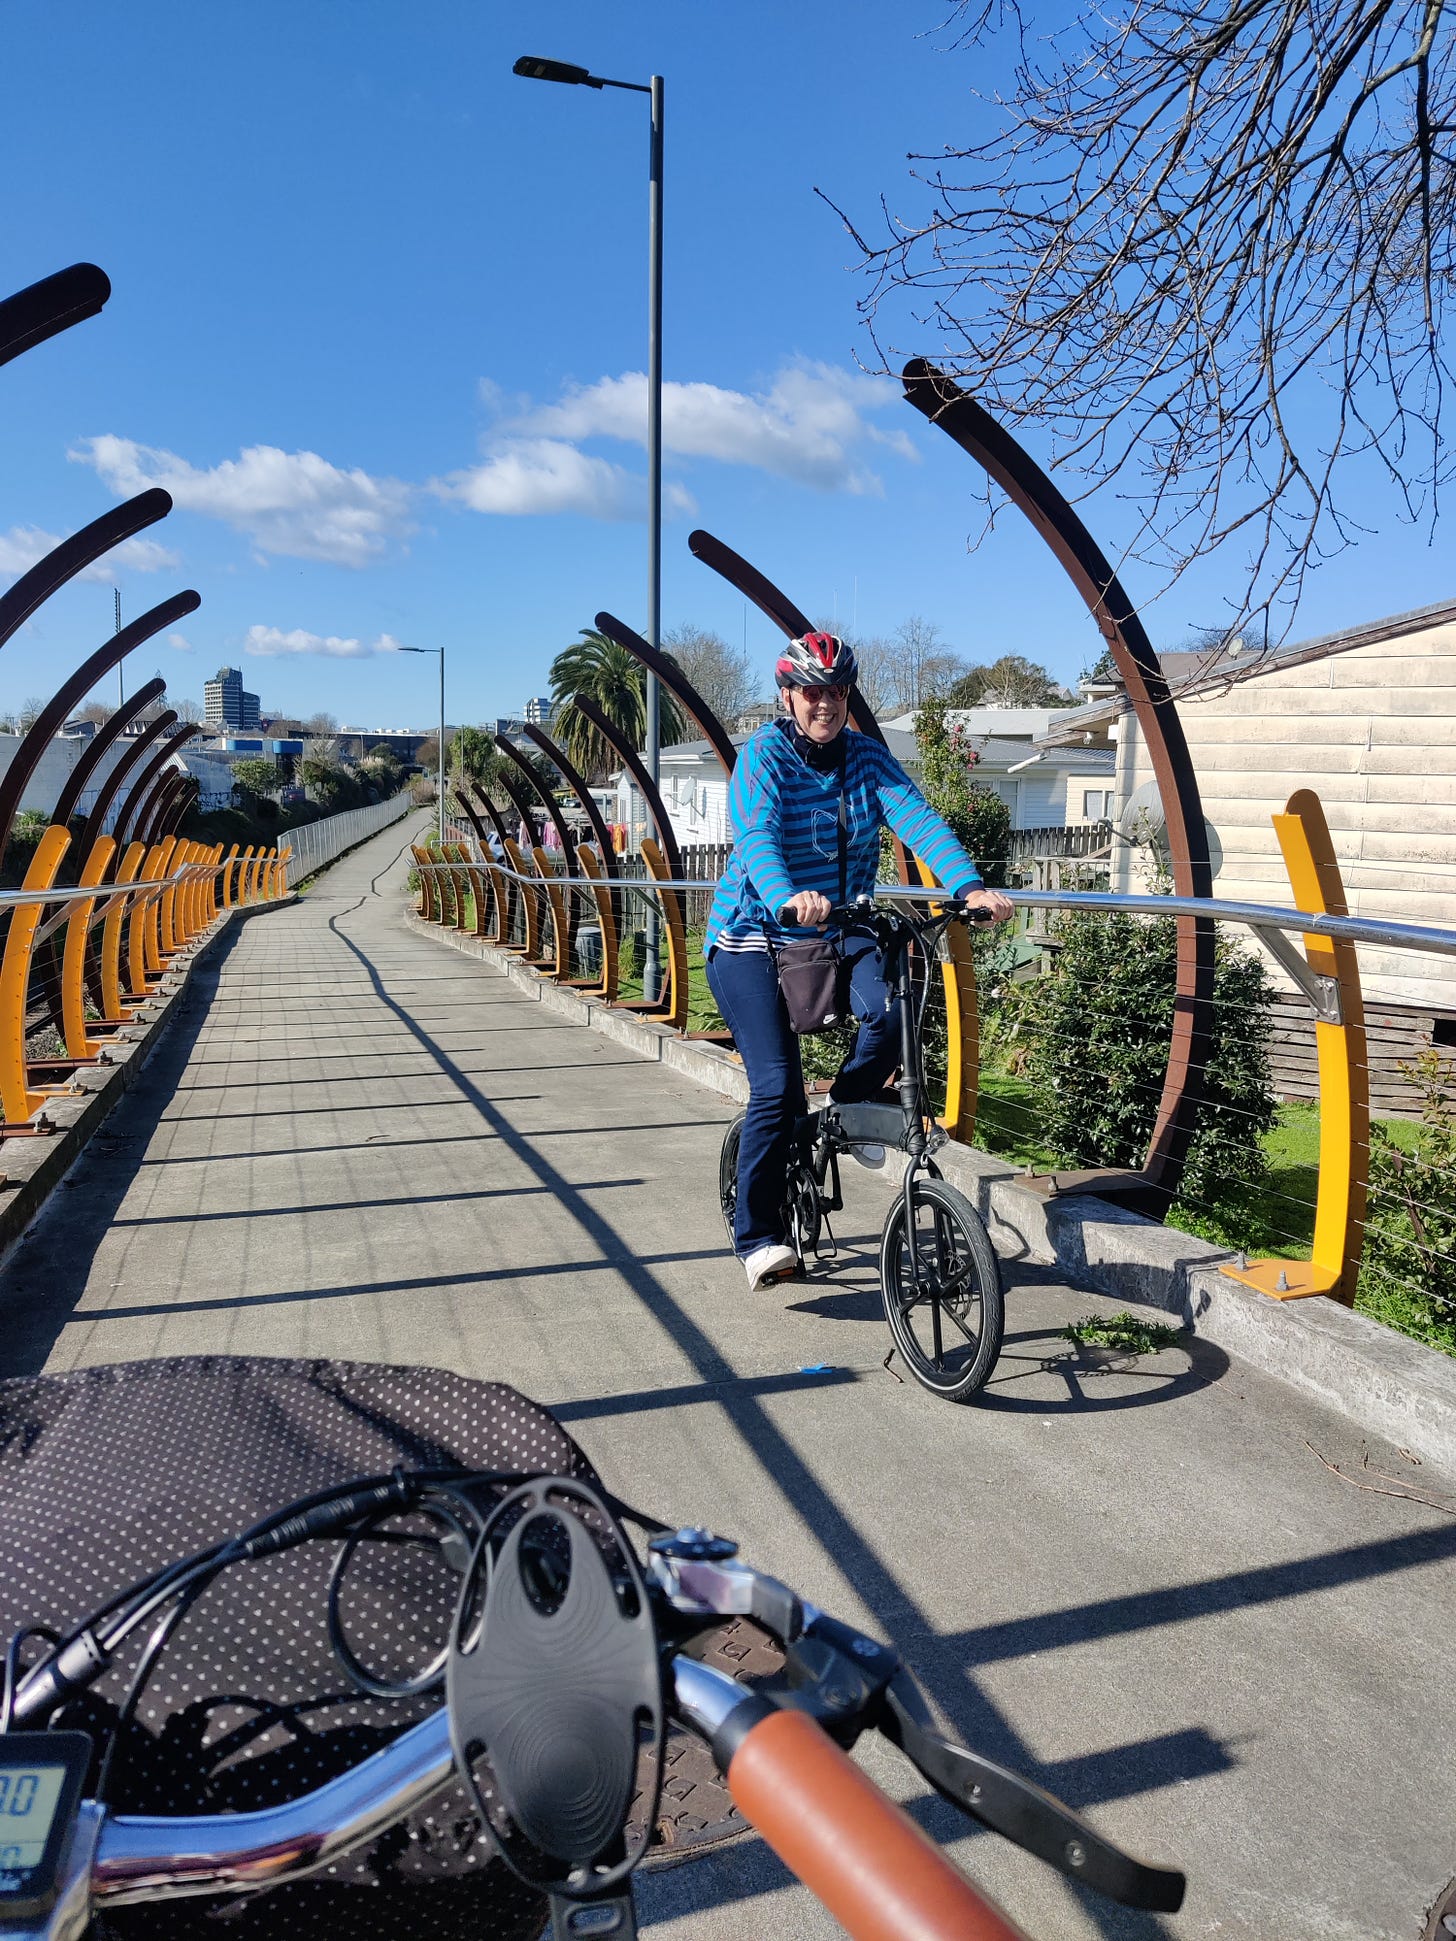 A photograph taken by someone on a bike, on the Western Rail Trail, with Rebekah on her biking coming the other way, going up-hill and smiling at the camera. 